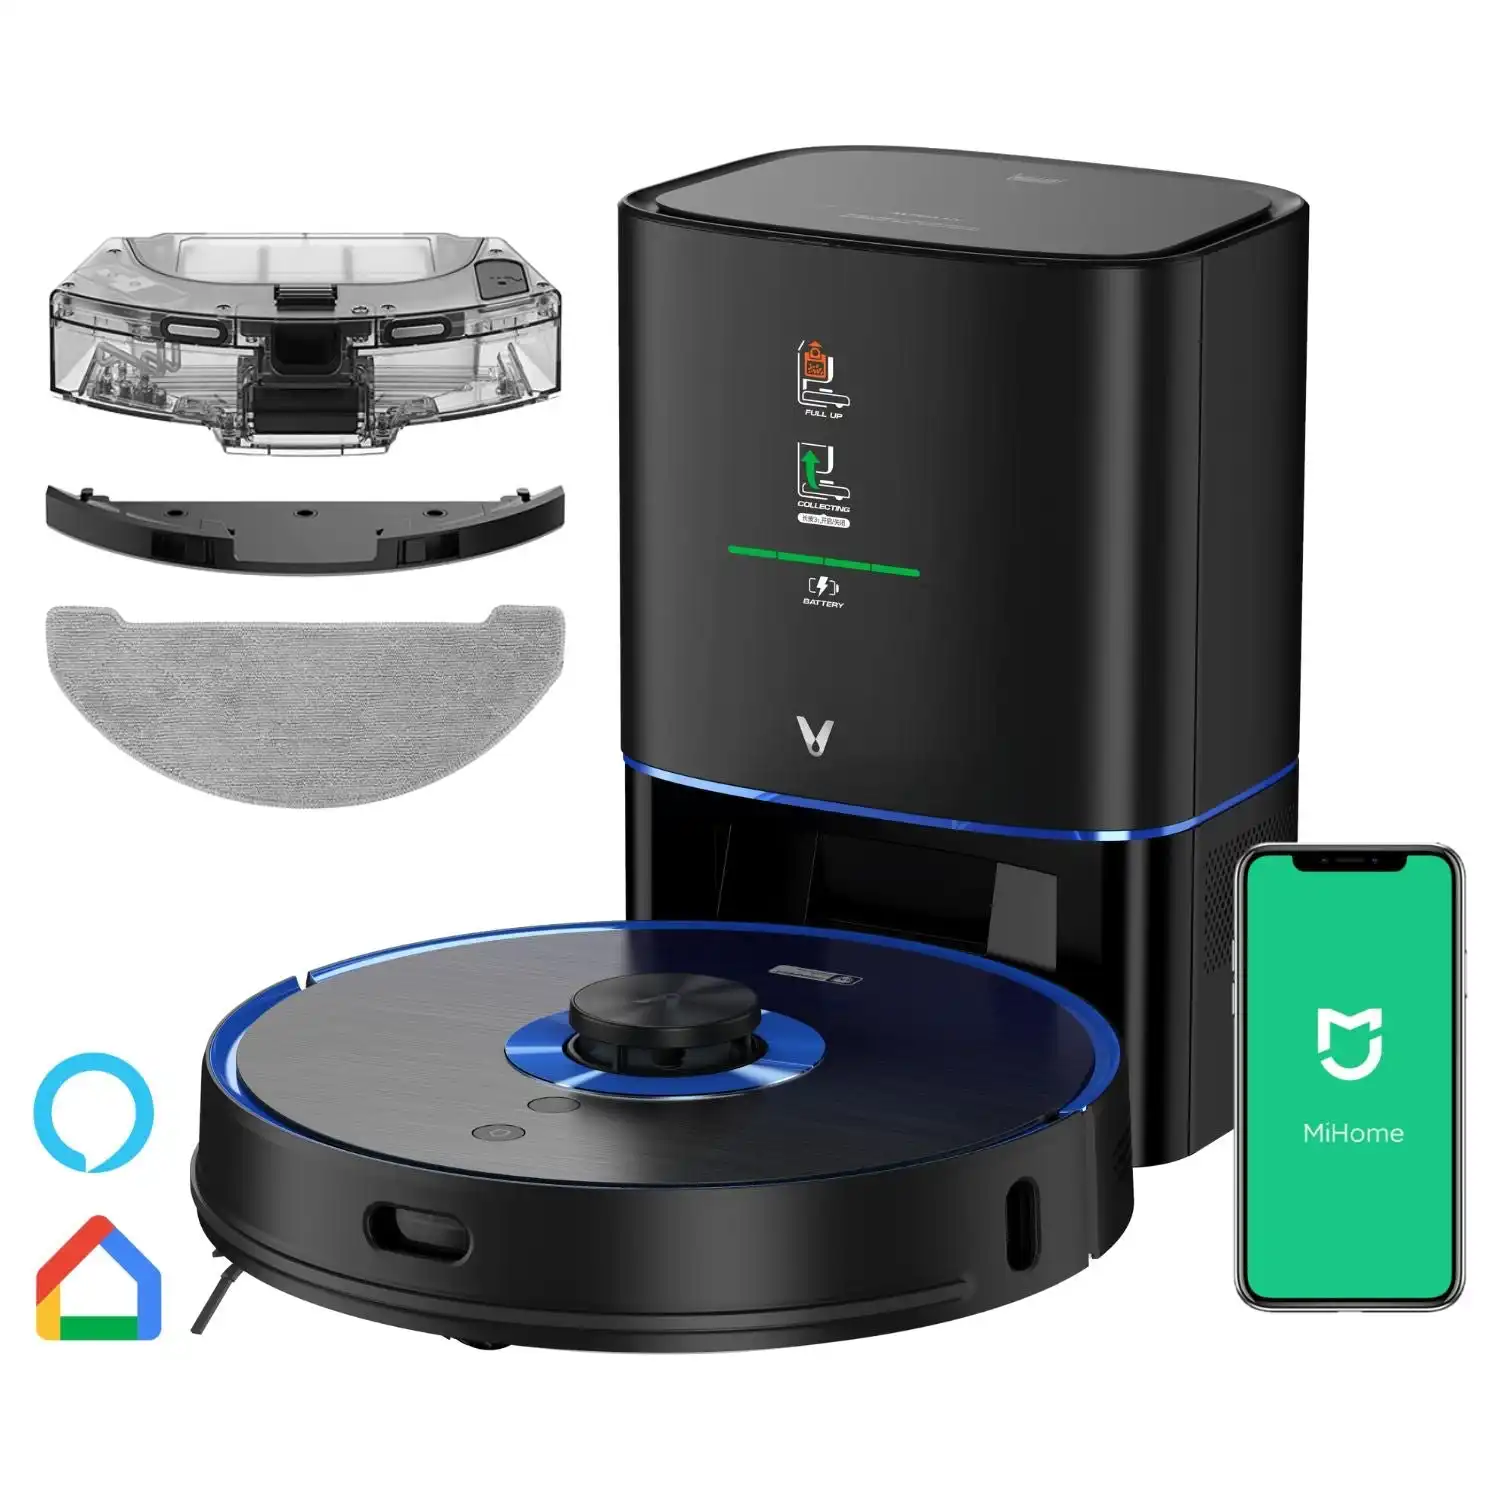 Viomi S9 UV Robot Vacuum & Mop Cleaner with Auto-Empty Station Smart Mapping APP Control